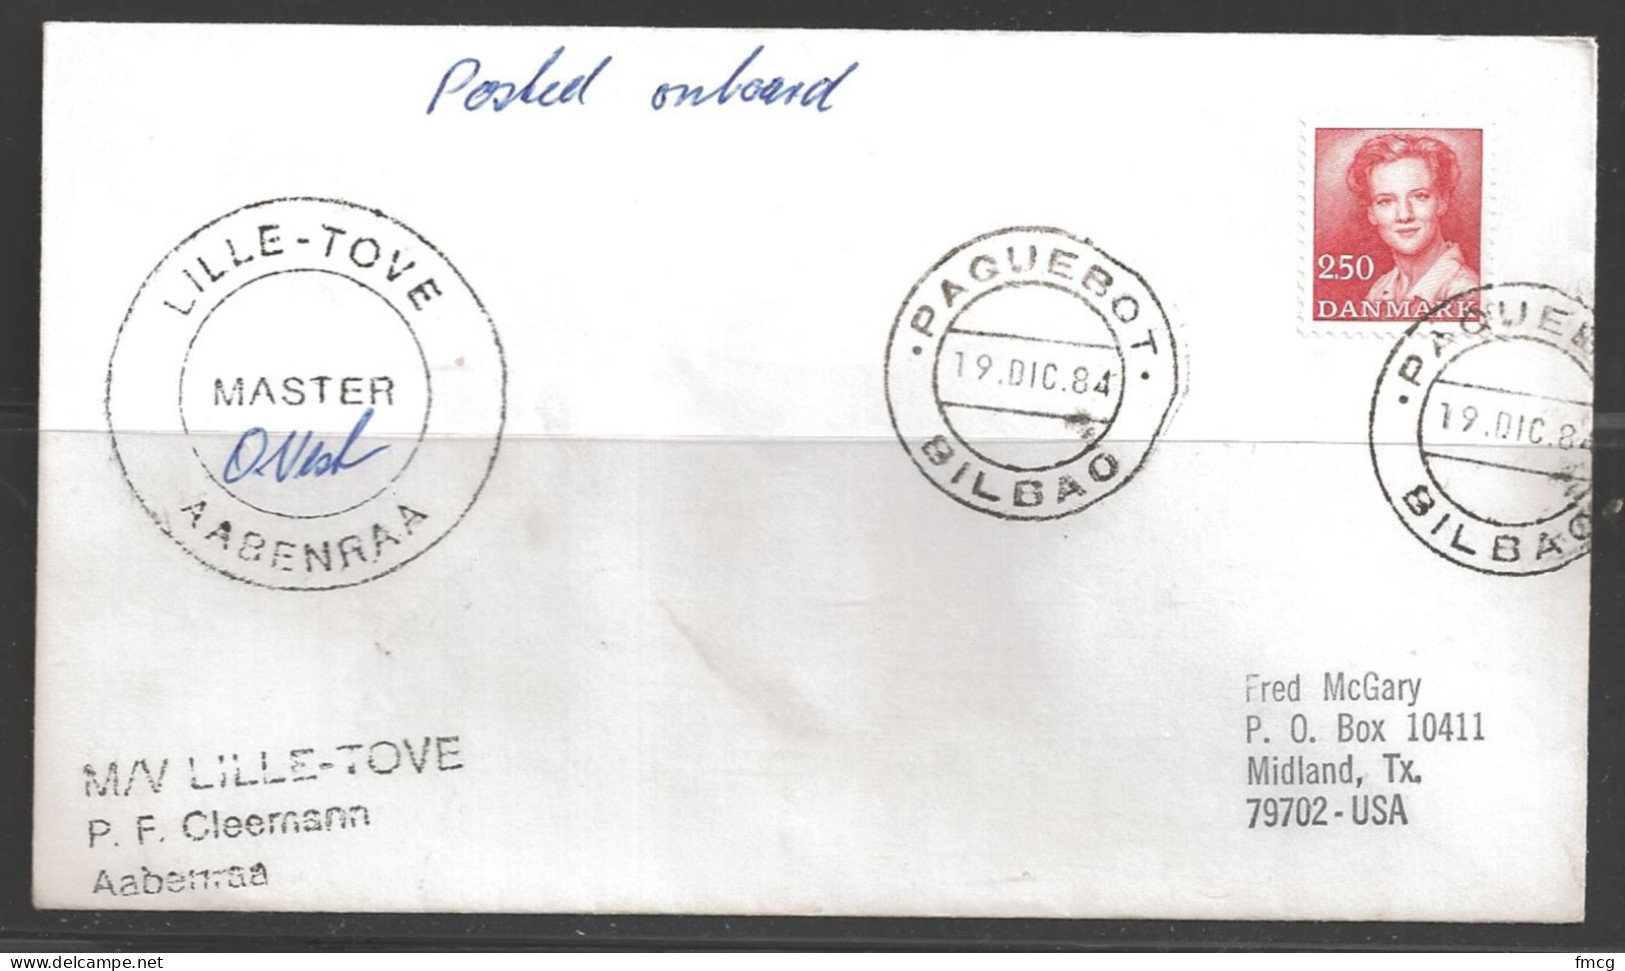 1984 Paquebot Cover, Denmark Stamp Used At Bilbao, Spain - Storia Postale